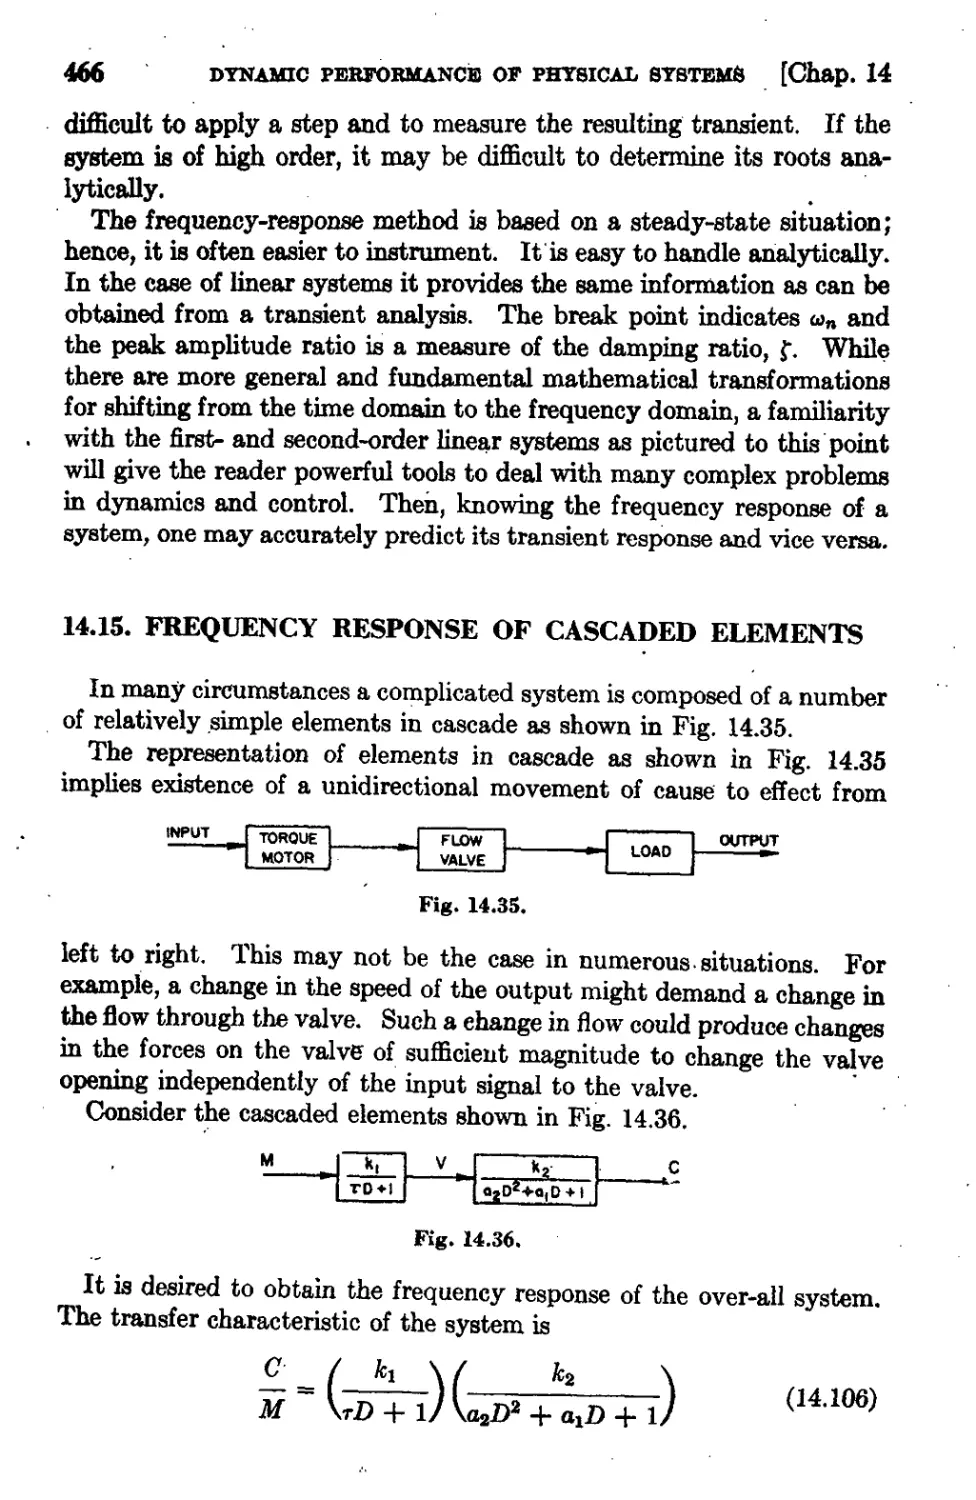 14.15 Frequency Response of Cascaded Elements